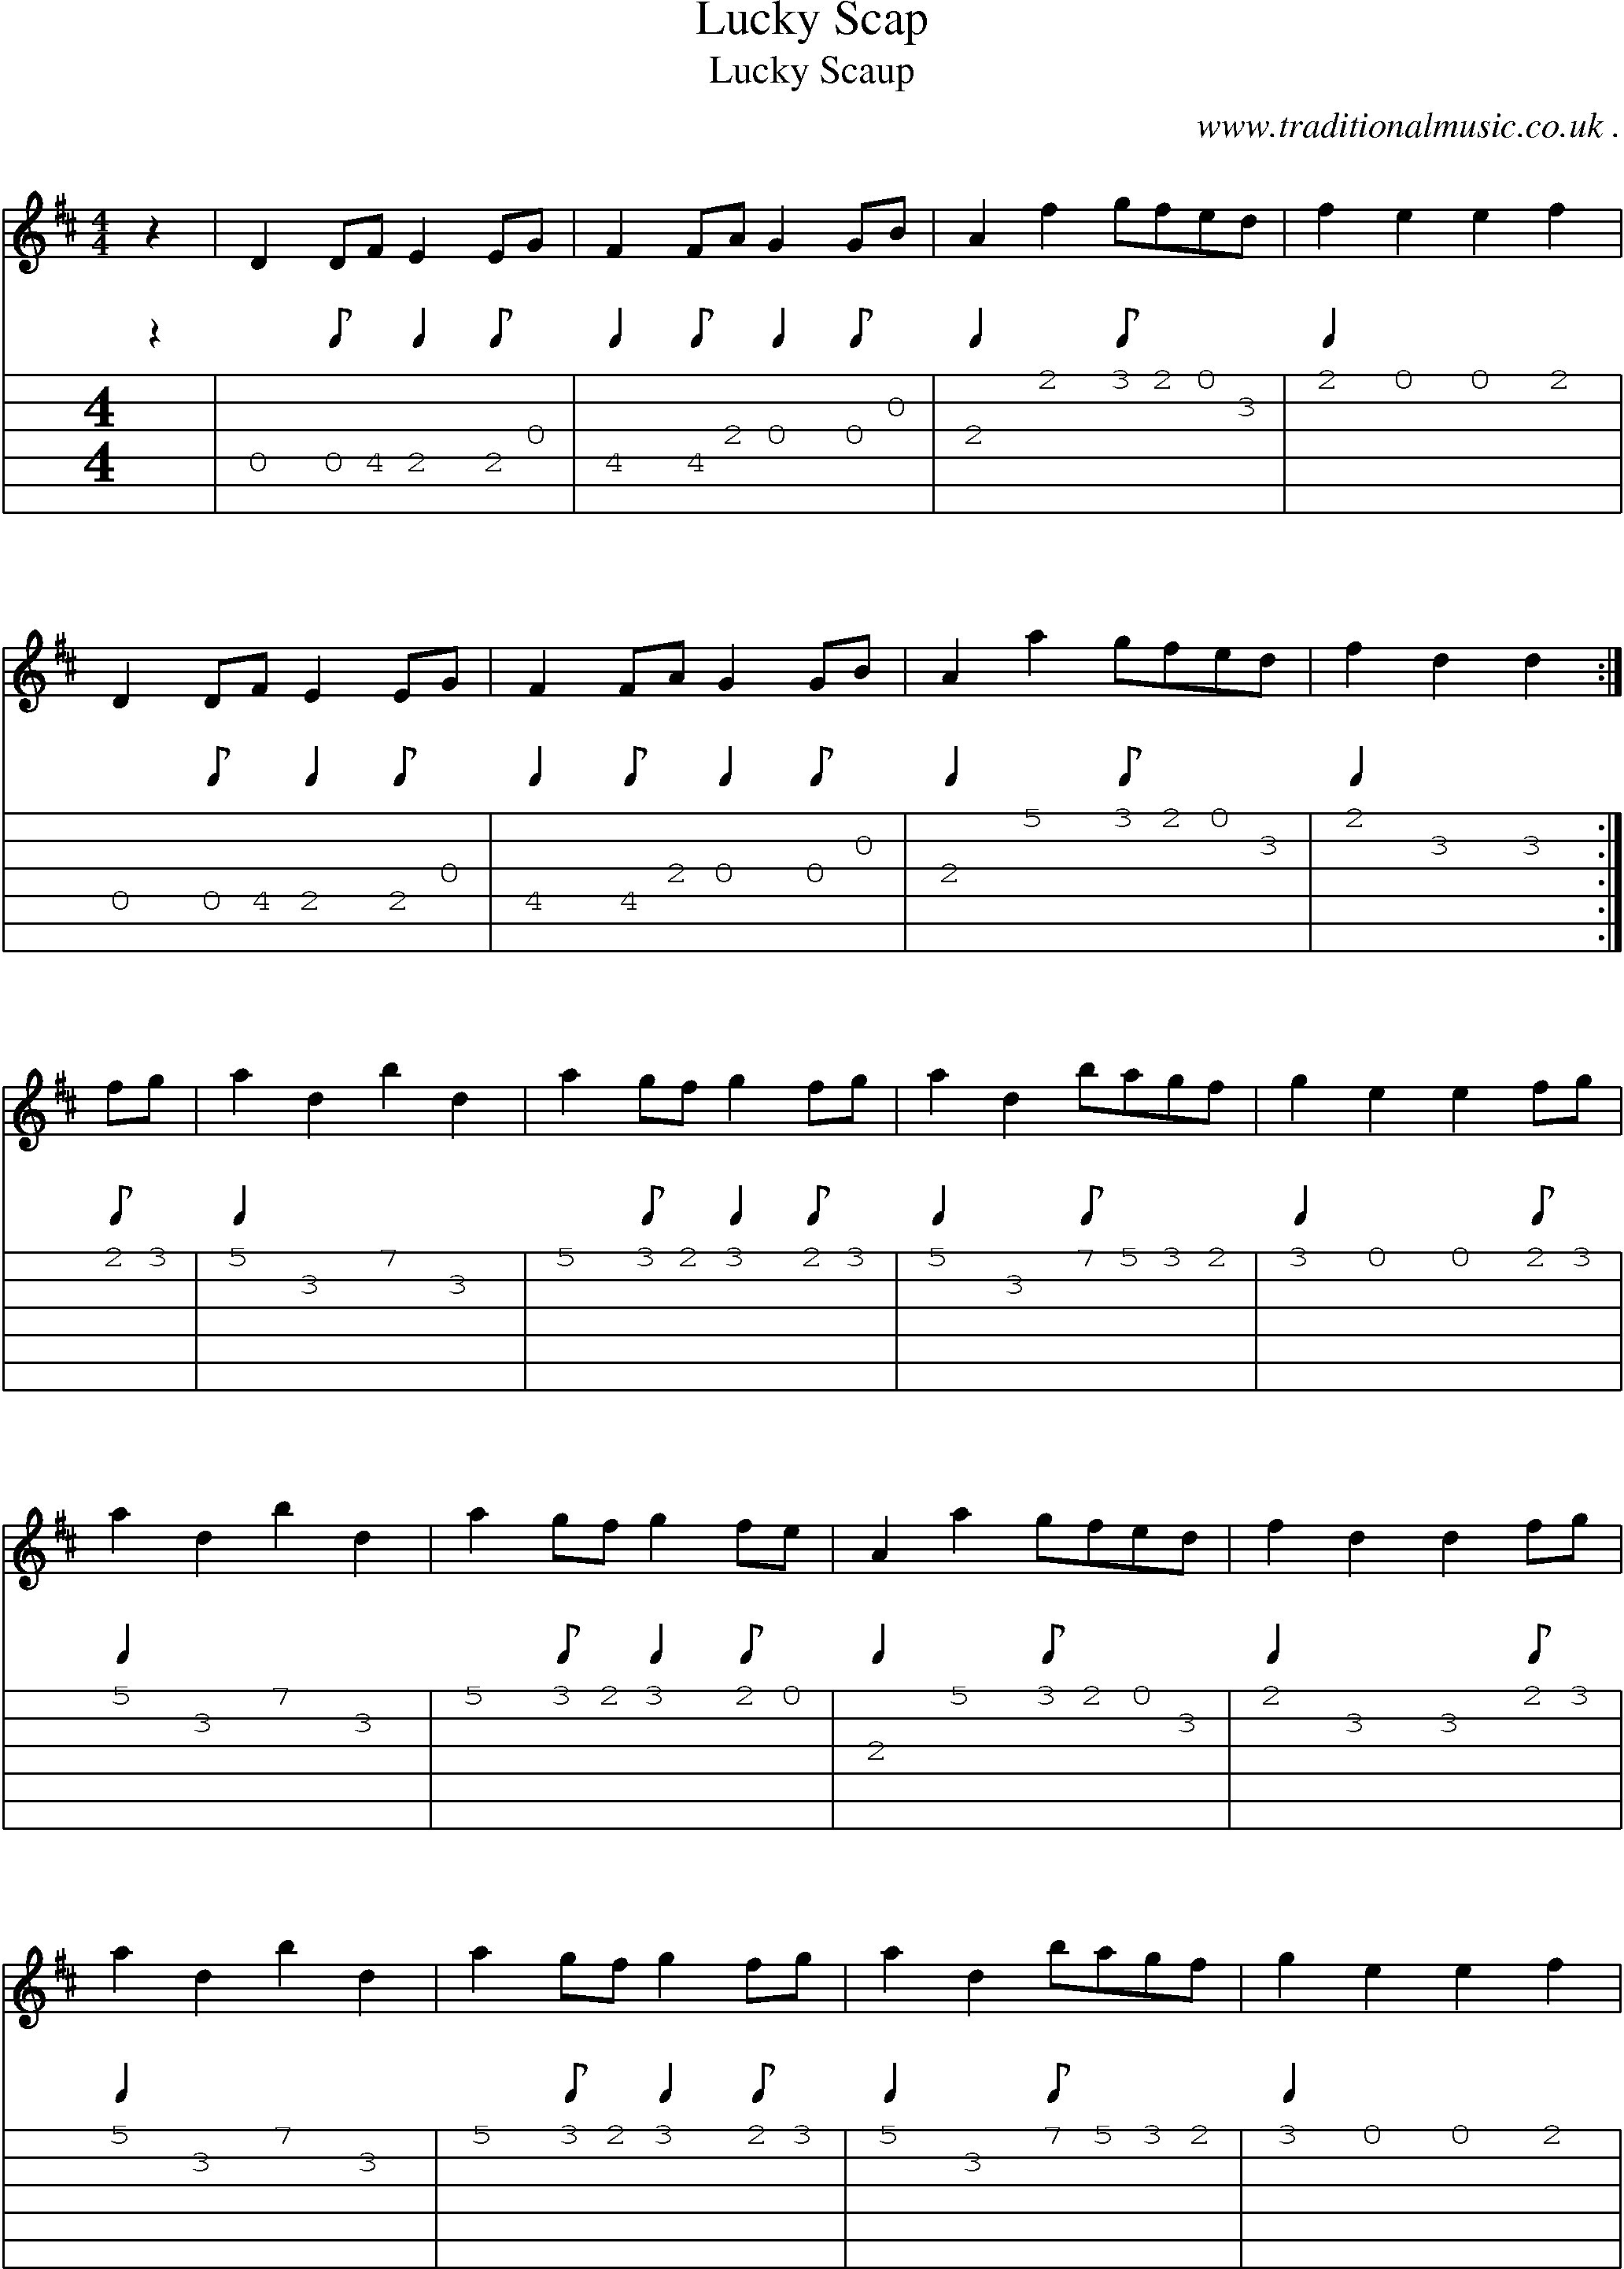 Sheet-music  score, Chords and Guitar Tabs for Lucky Scap